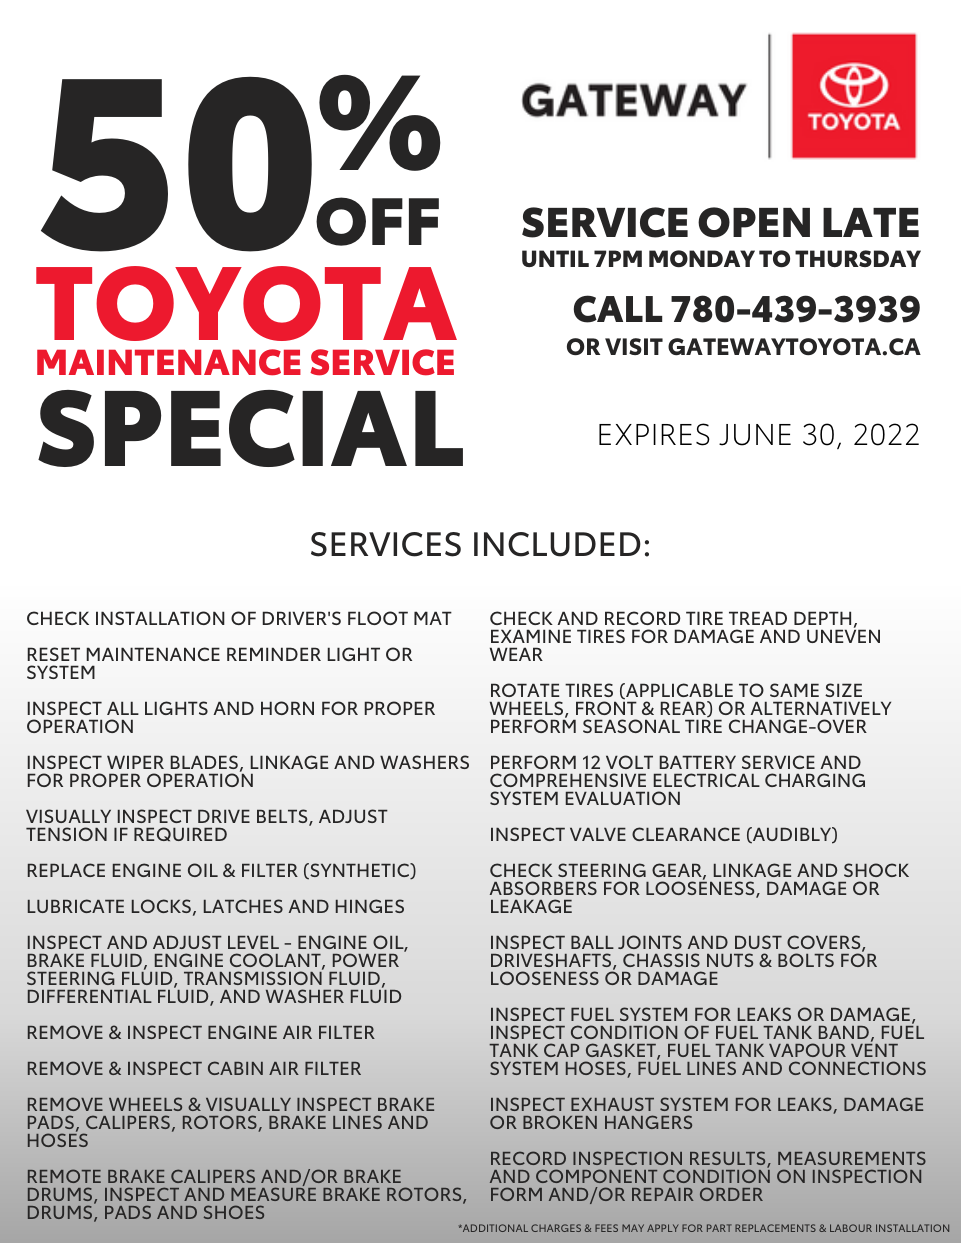 50% Off Toyota Maintenance Service Special